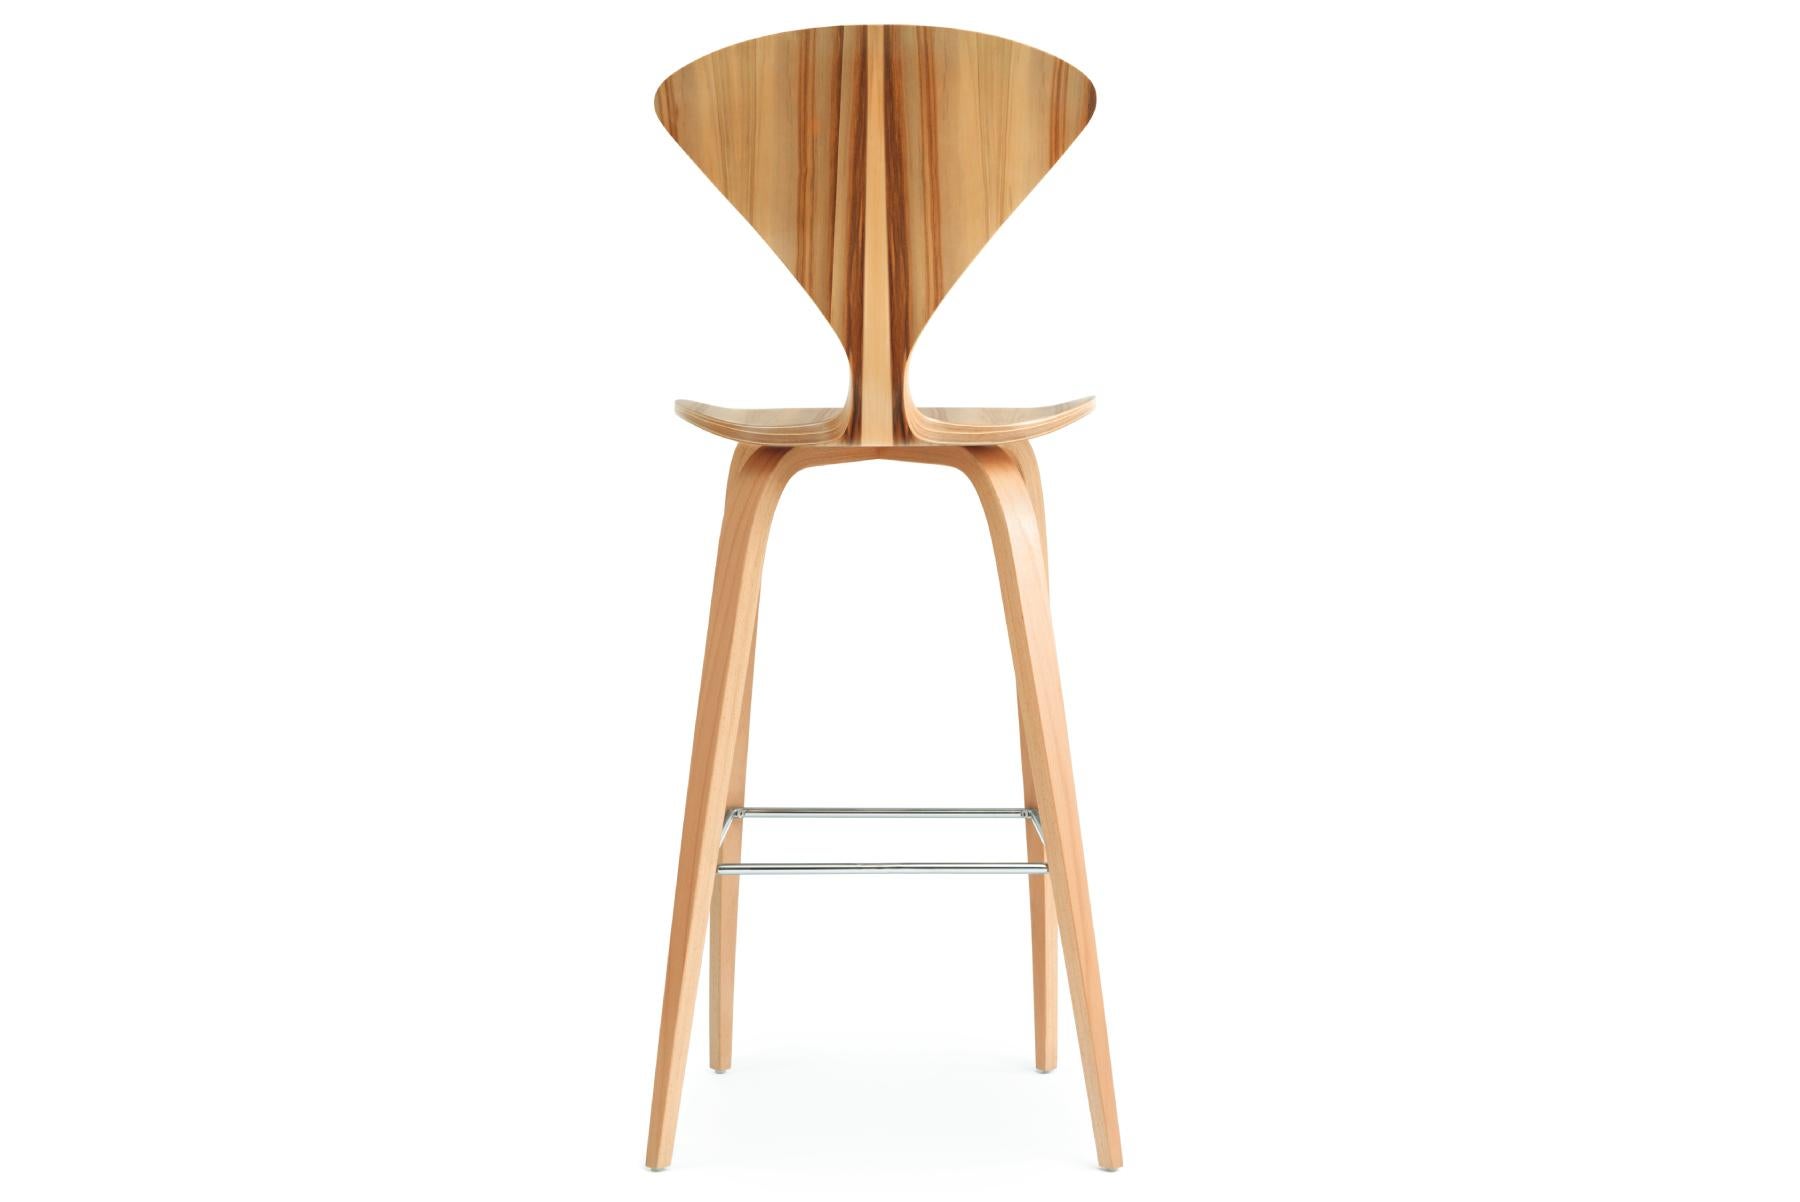 The 1958 molded plywood stools by Norman Cherner have been seen in some high places. Available in counter or bar height with a wood or metal base. The seat is made of laminated plywood of graduated thickness, from 15 plys to 5 plys at the perimeter